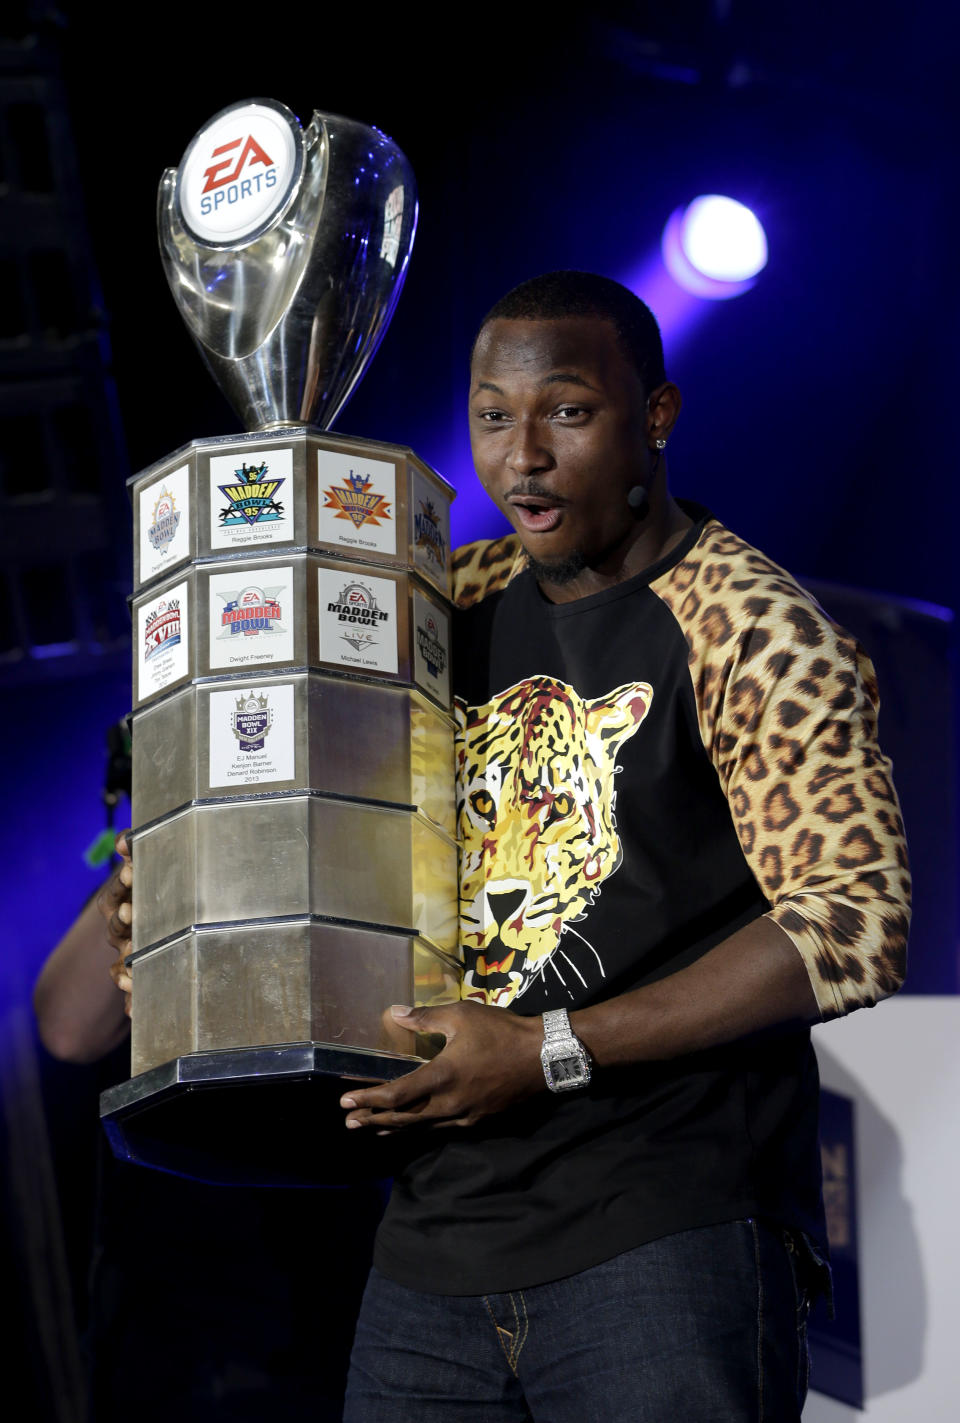 This Jan. 30, 2014 photo shows Philadelphia Eagles' LeSean McCoy holding a trophy after winning the Madden Bowl video game tournament held next to the Bud Light Hotel in New York. Norwegian Cruise Line’s just-launched ship Norwegian Getaway is serving as a floating hotel for Super Bowl weekend events sponsored by the beer brand Bud Light. Renamed the Bud Light Hotel New York, the ship is docked at Pier 88 in Manhattan on the Hudson. Its 18 decks house 4,000 guests in 1,900 staterooms. Those aboard are mostly connected to Bud Light's retailers, partners and VIP guests. (AP Photo)